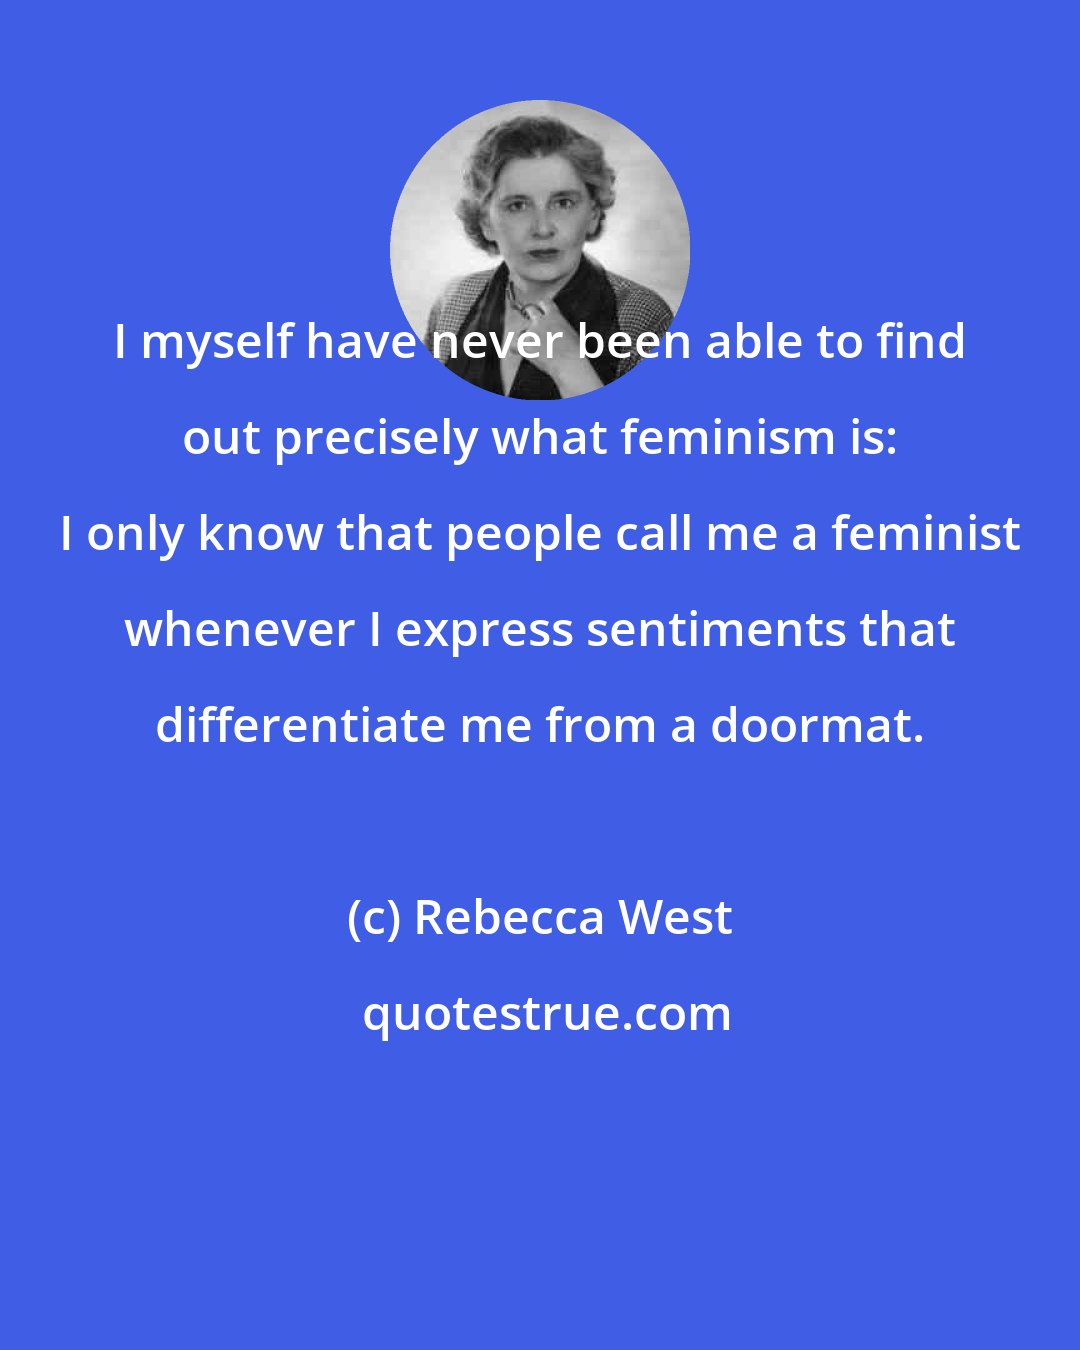 Rebecca West: I myself have never been able to find out precisely what feminism is: I only know that people call me a feminist whenever I express sentiments that differentiate me from a doormat.